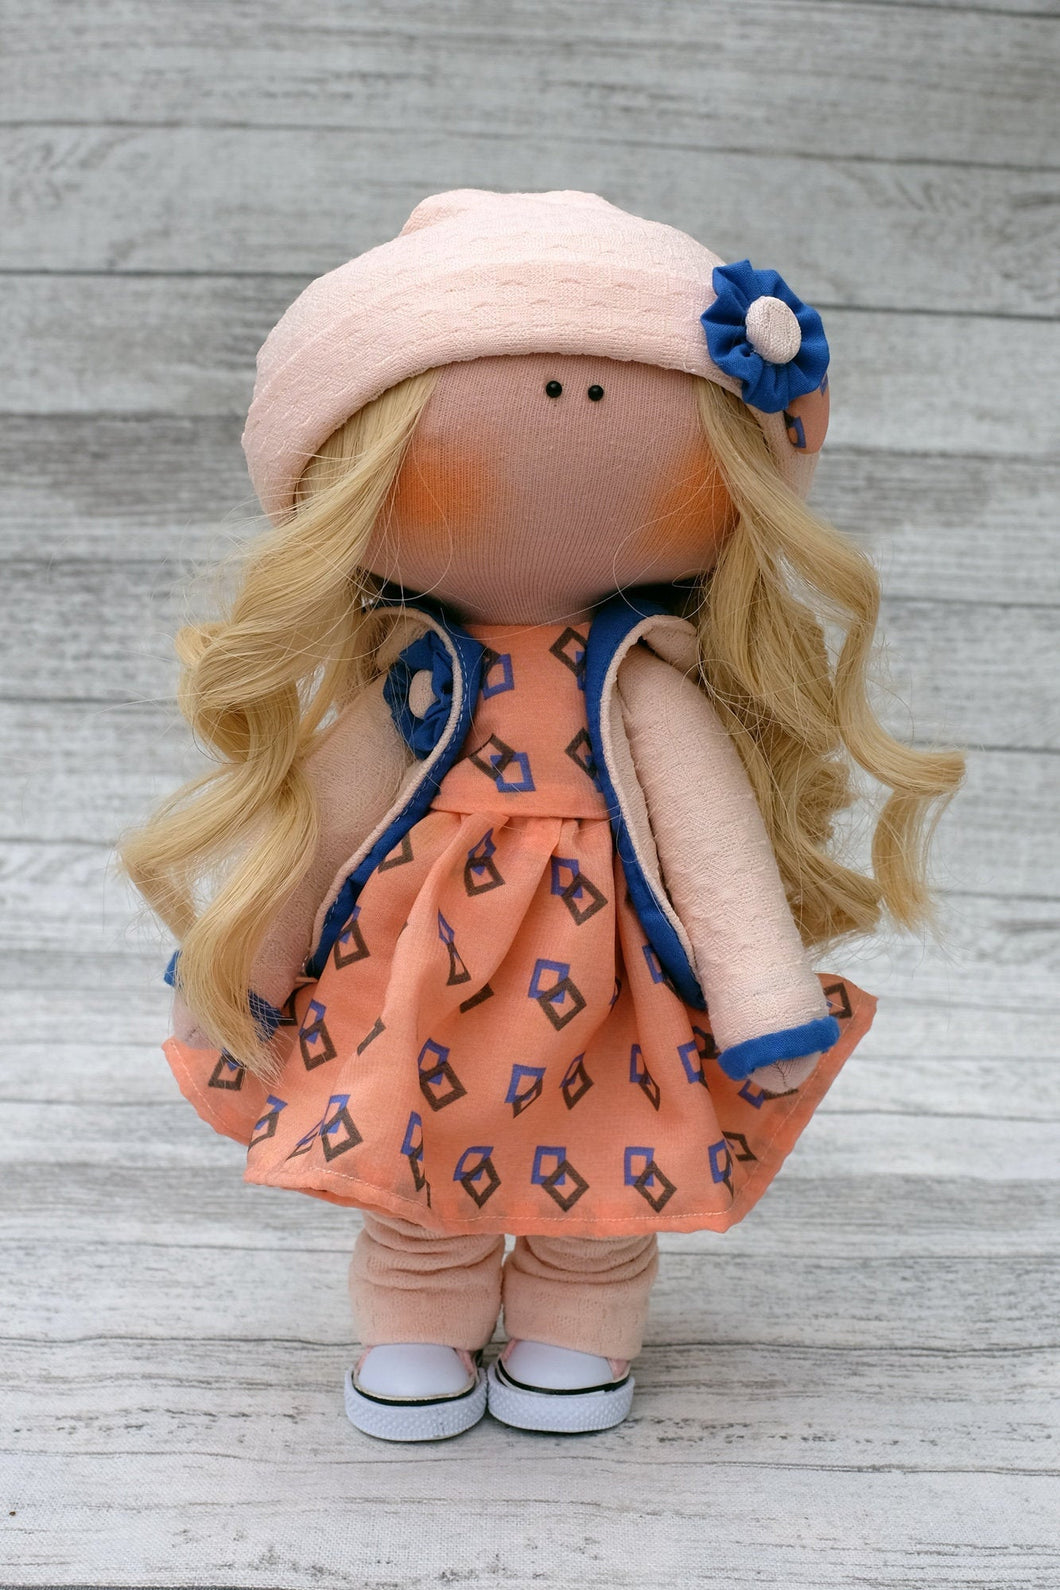 Charlotte – Collectible Handmade Textile Interior Doll